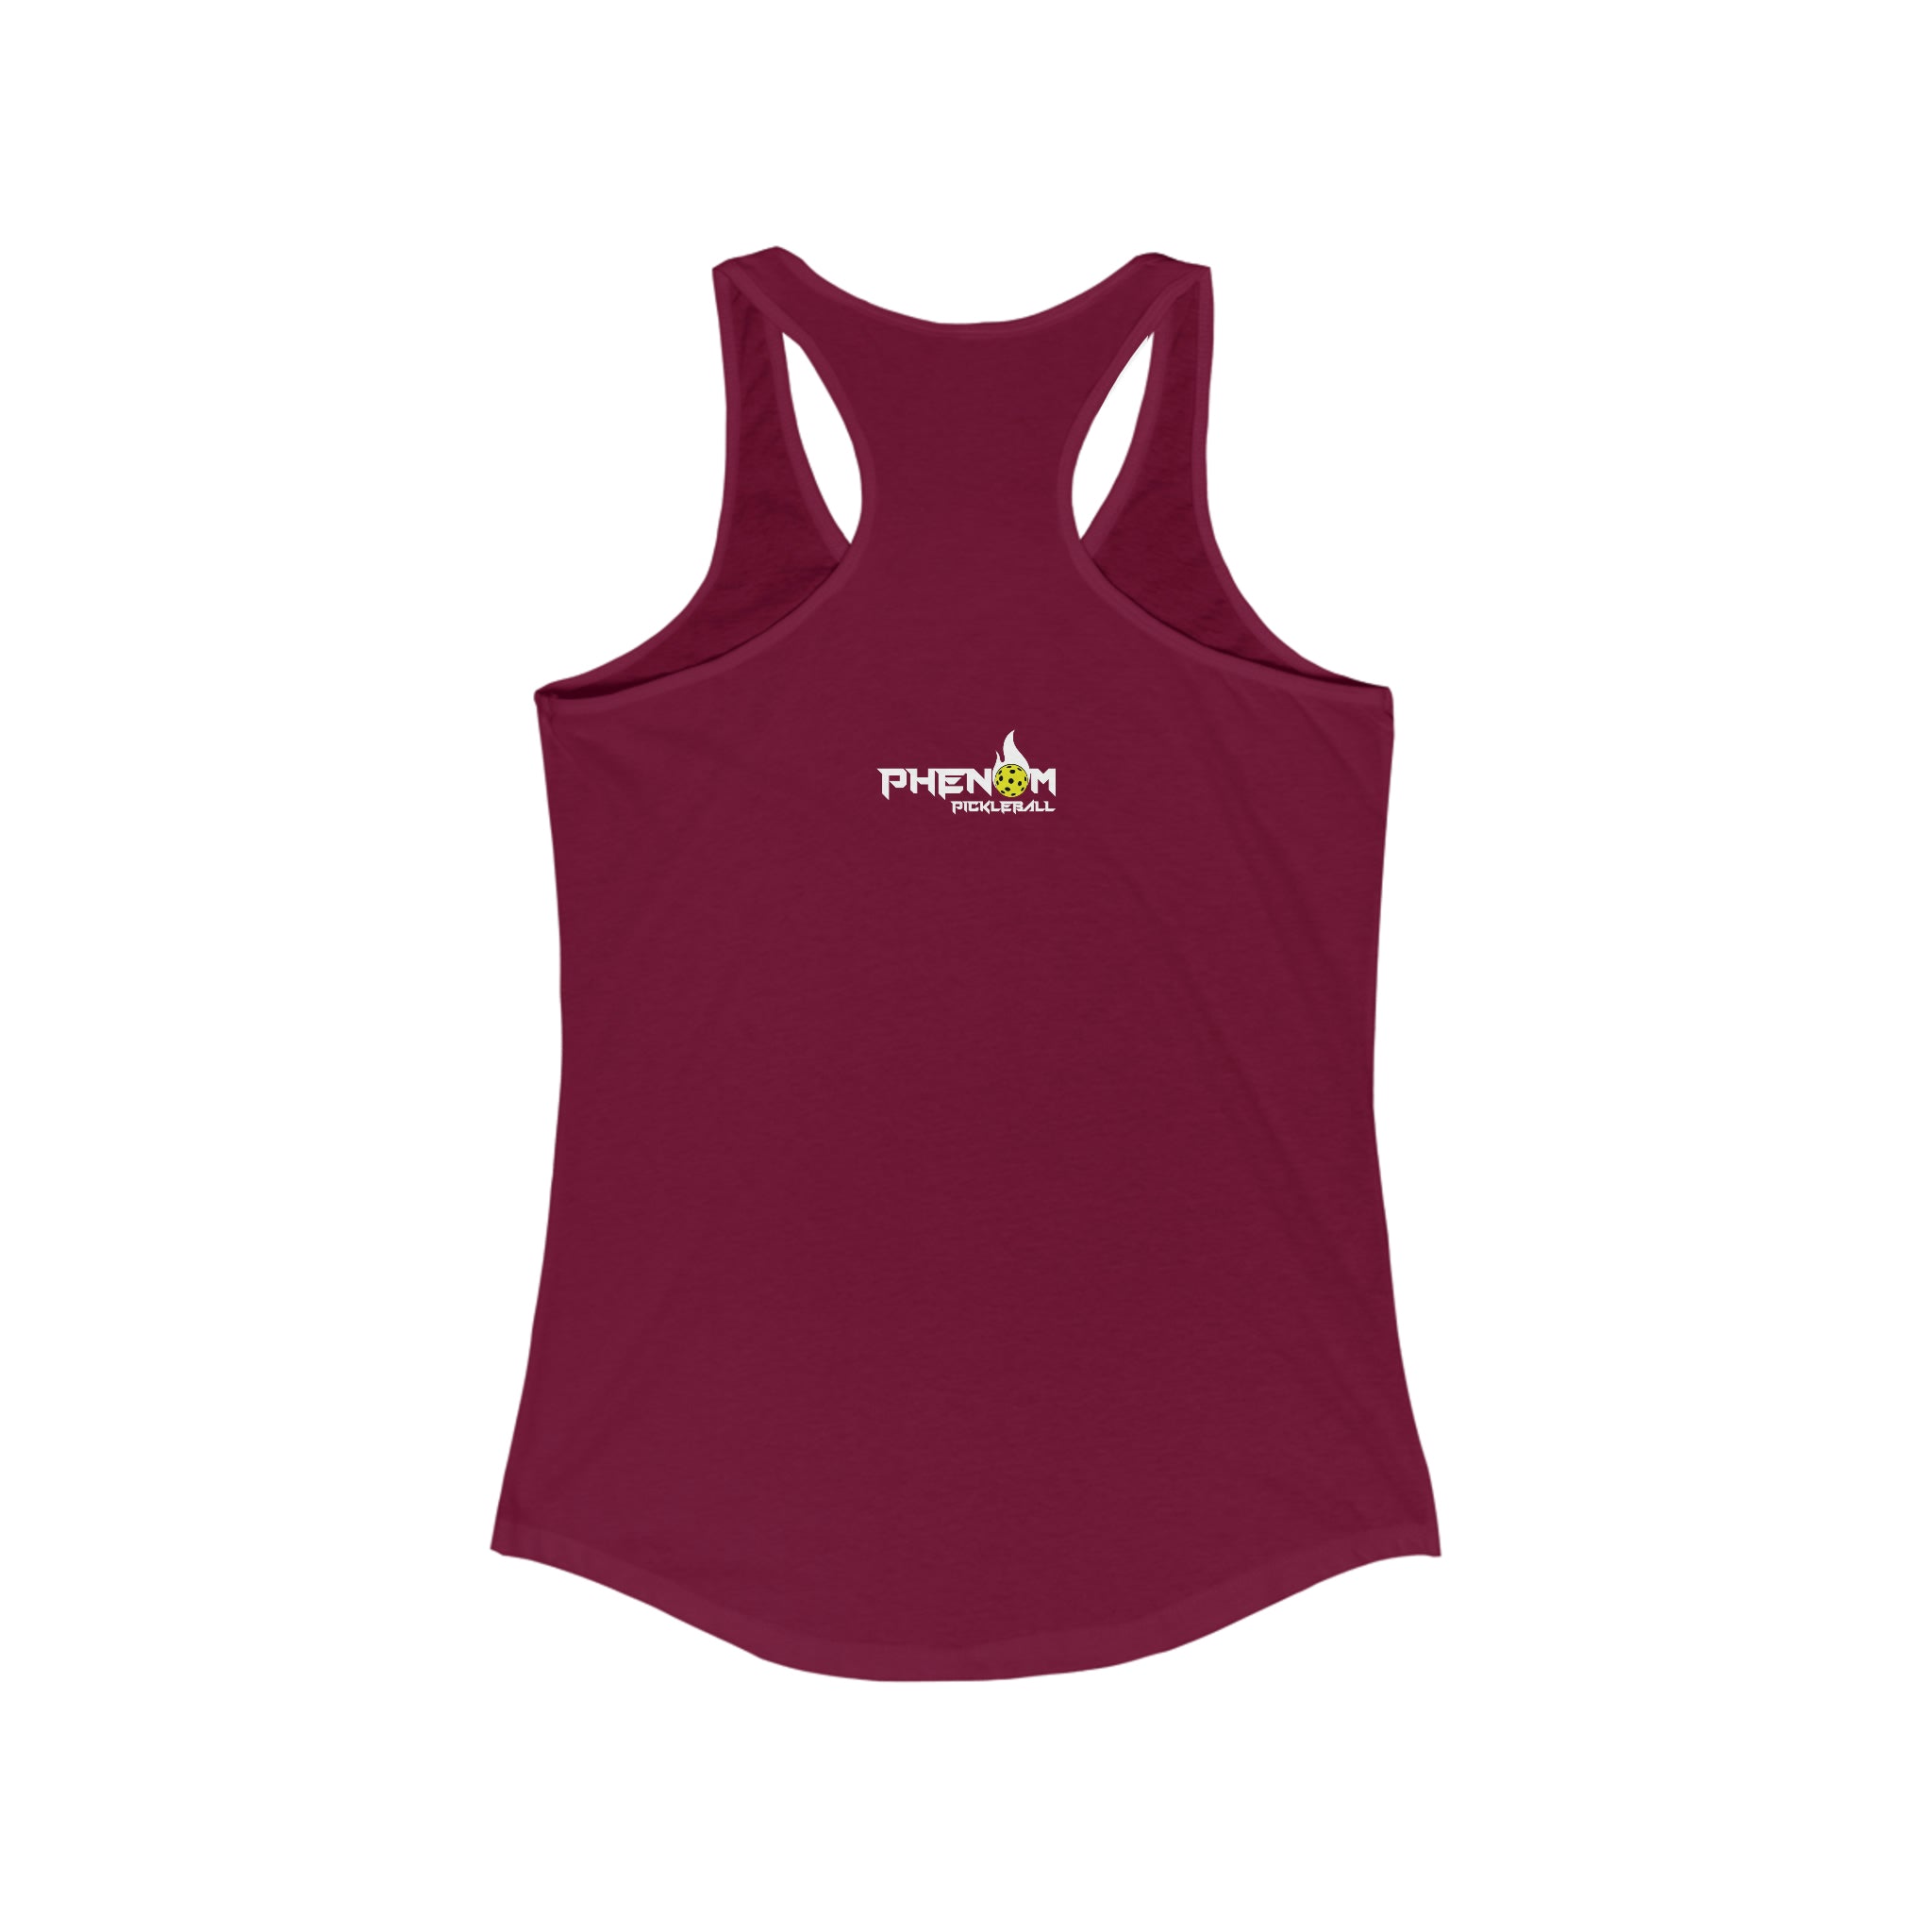 maroon just here for the dinks and giggles women's racerback tank top pickleball apparel phenom logo back view